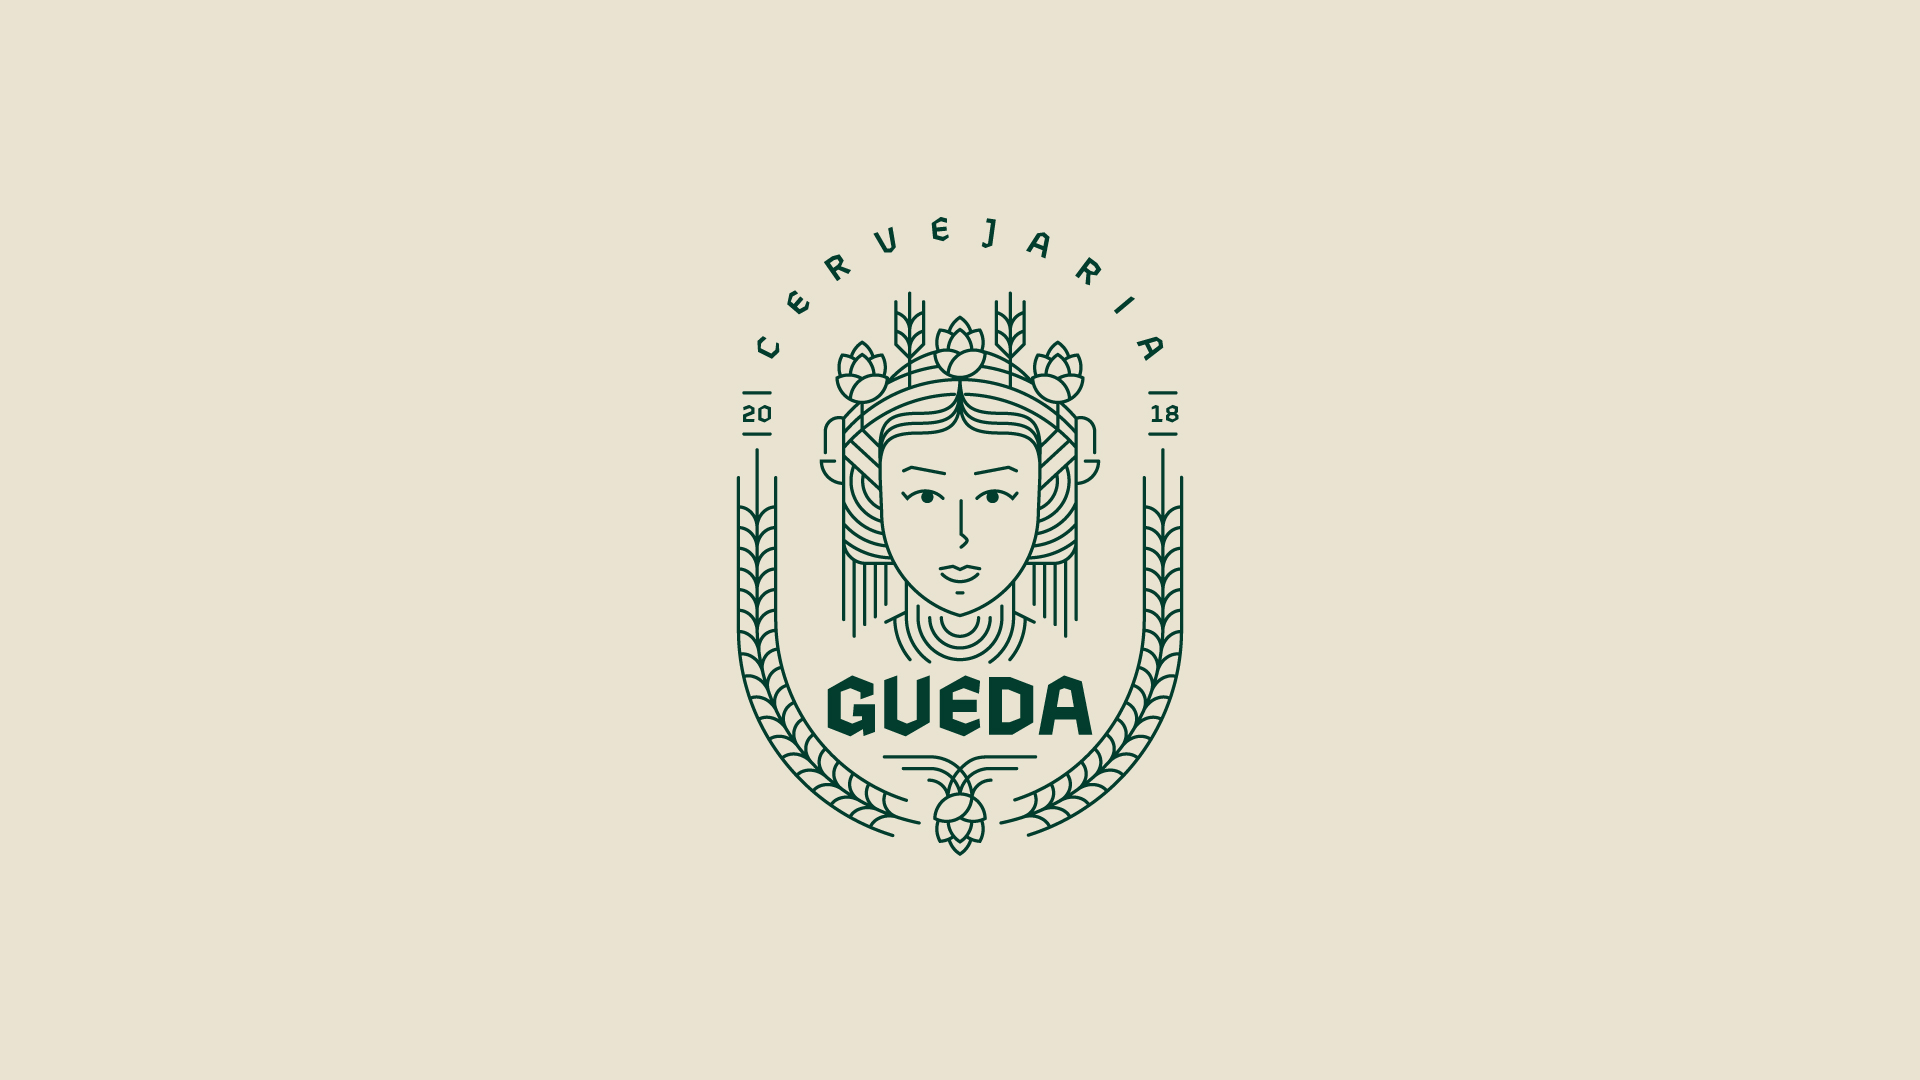 02_gueda_SEQUENCEEsdgh